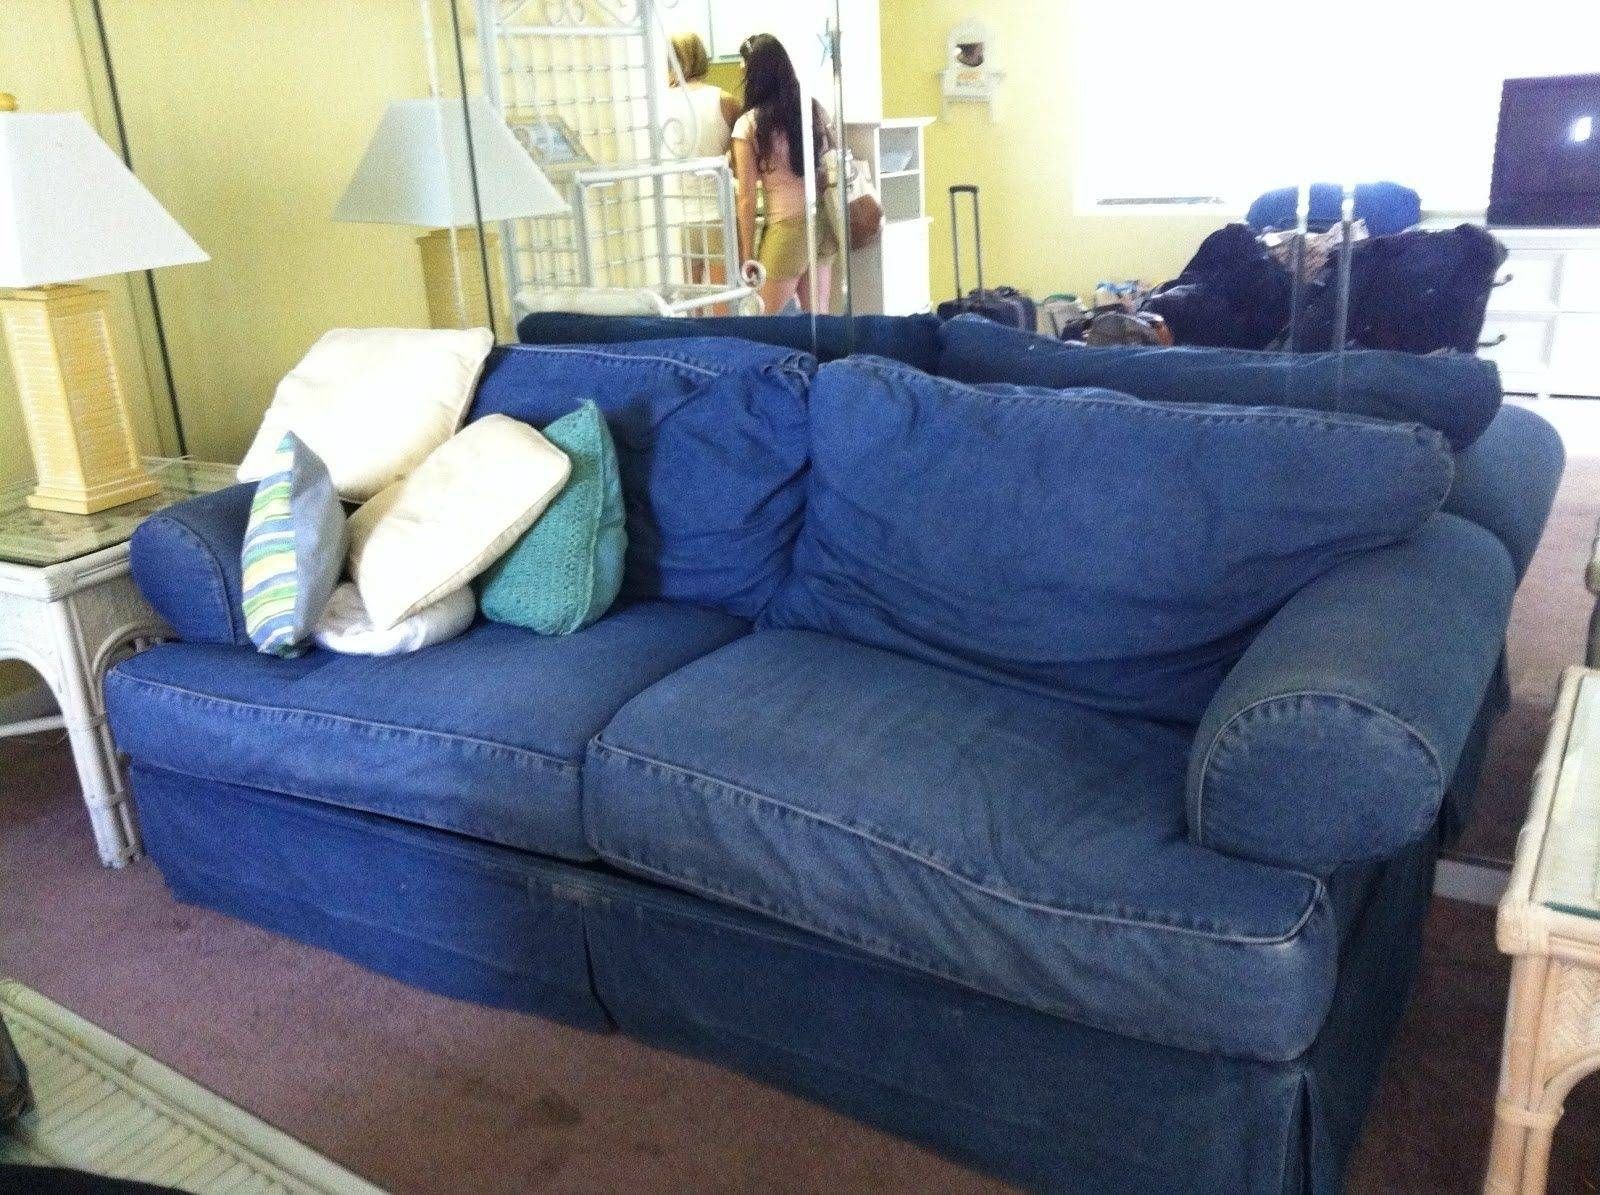 Stylish Slipcover Sleeper Sofa Top Cheap Furniture Ideas With For Slipcovers For Sleeper Sofas (View 15 of 15)